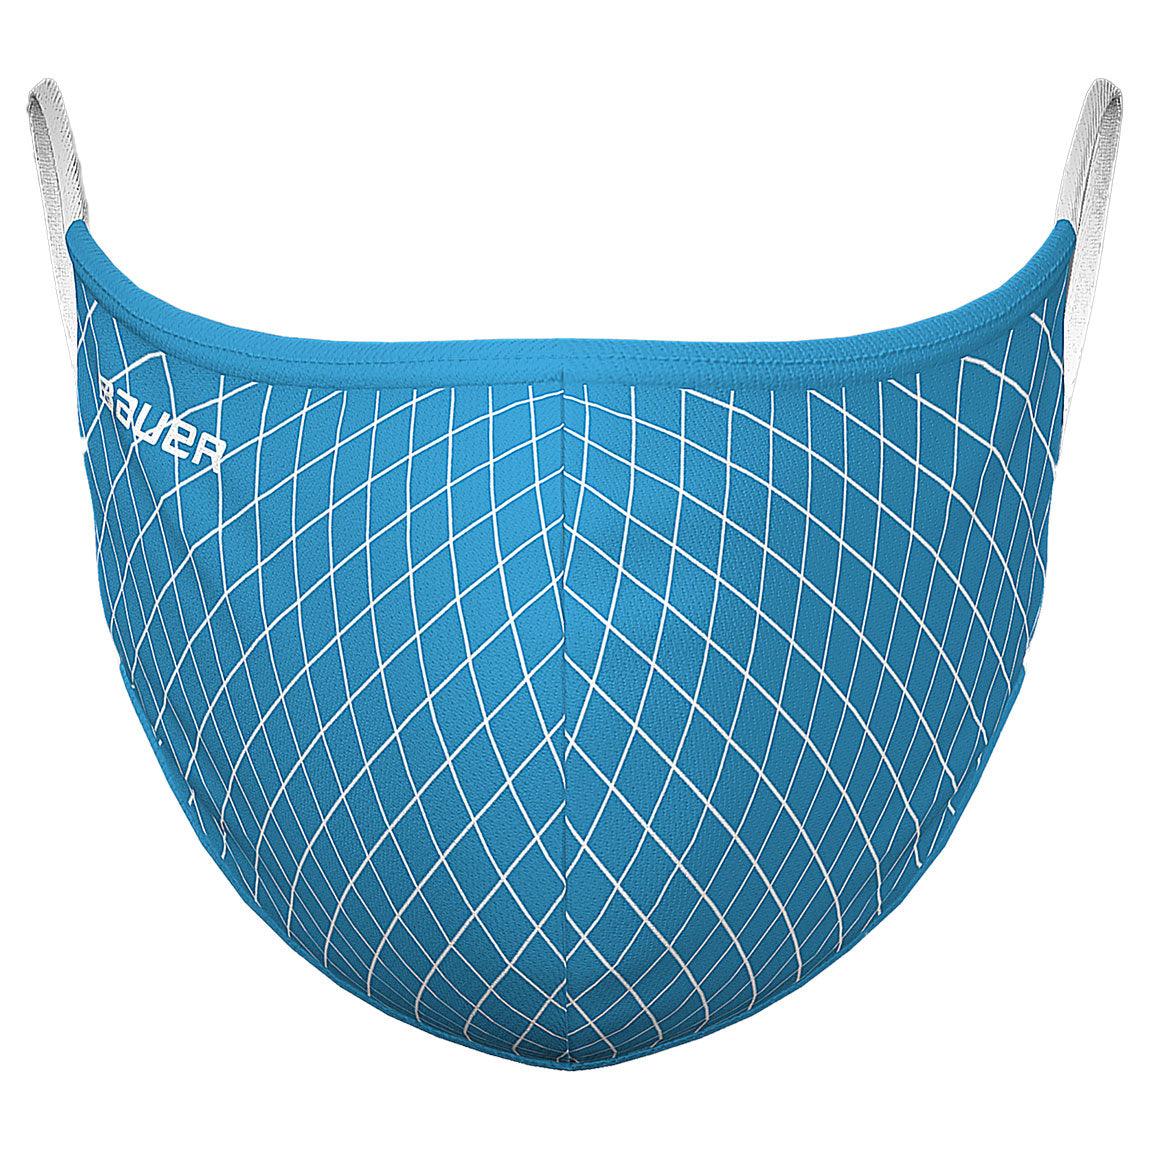 Reversible Fabric Face Mask - Sports Excellence